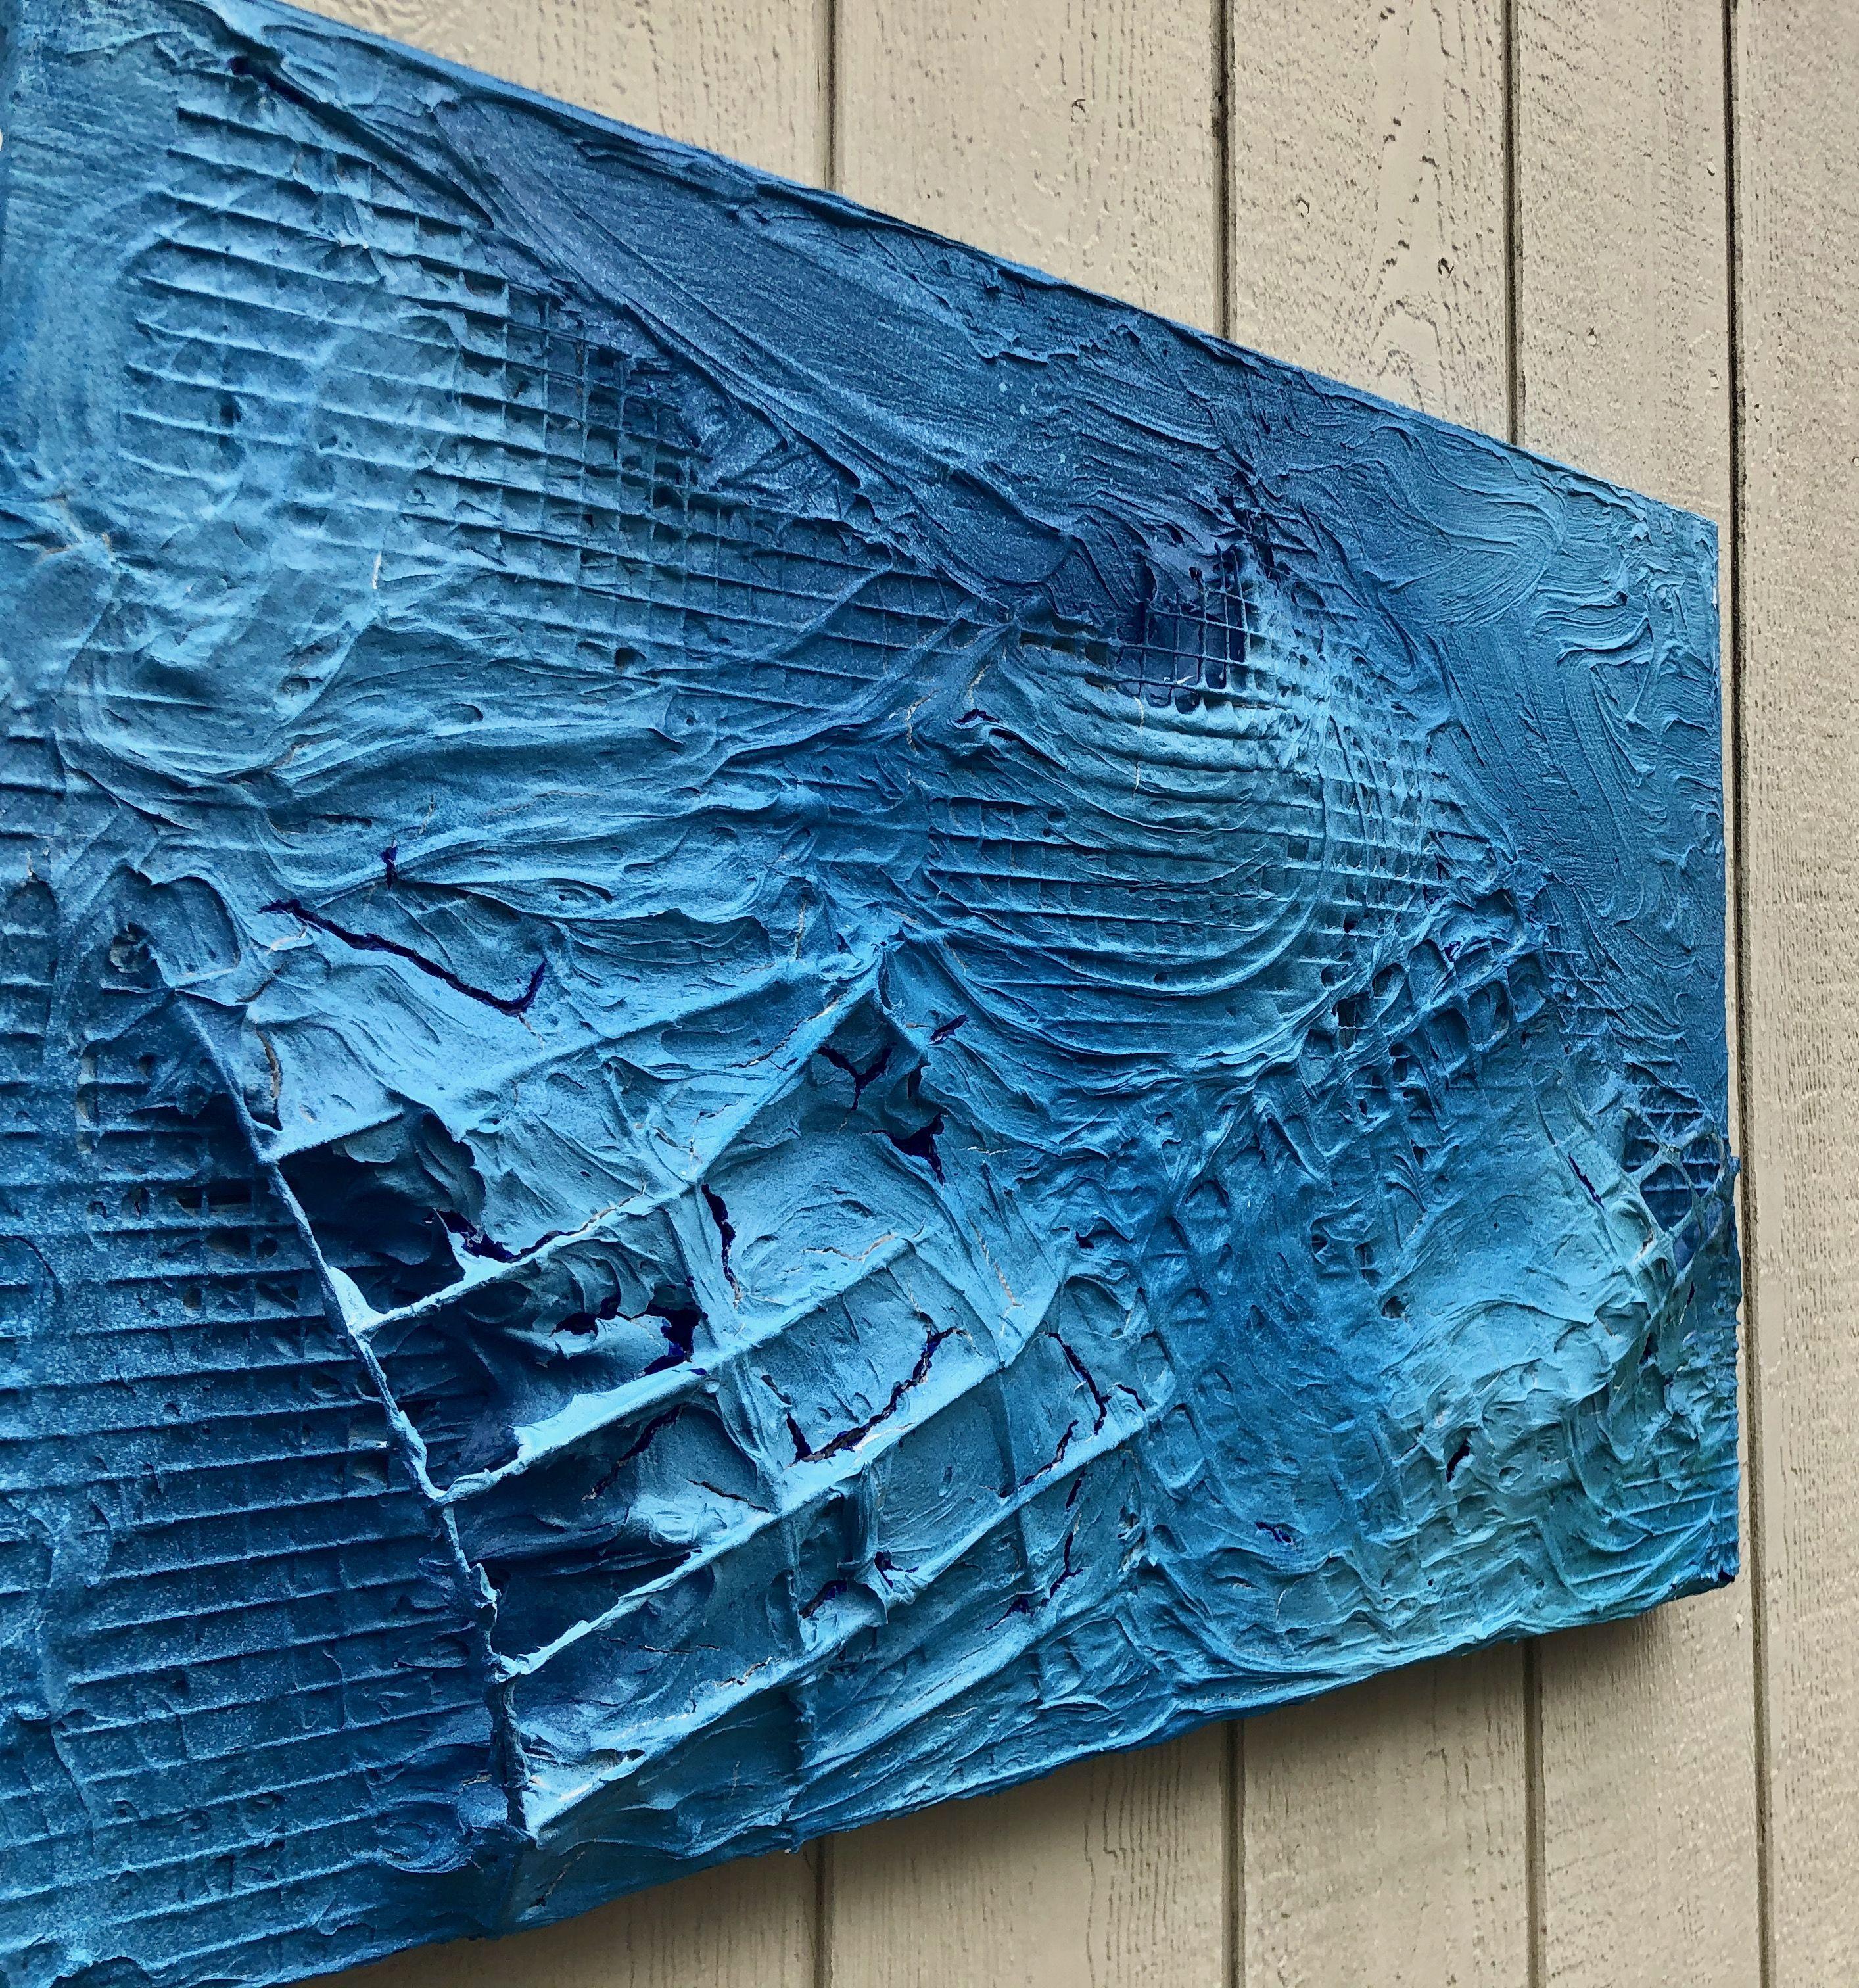 My first 3D experience with a different technique. Blue being my favorite color made it easy to explore blends of the hues while making it lift off the frame. The challenge was knowing how to do it for a temporary show piece but what about long term